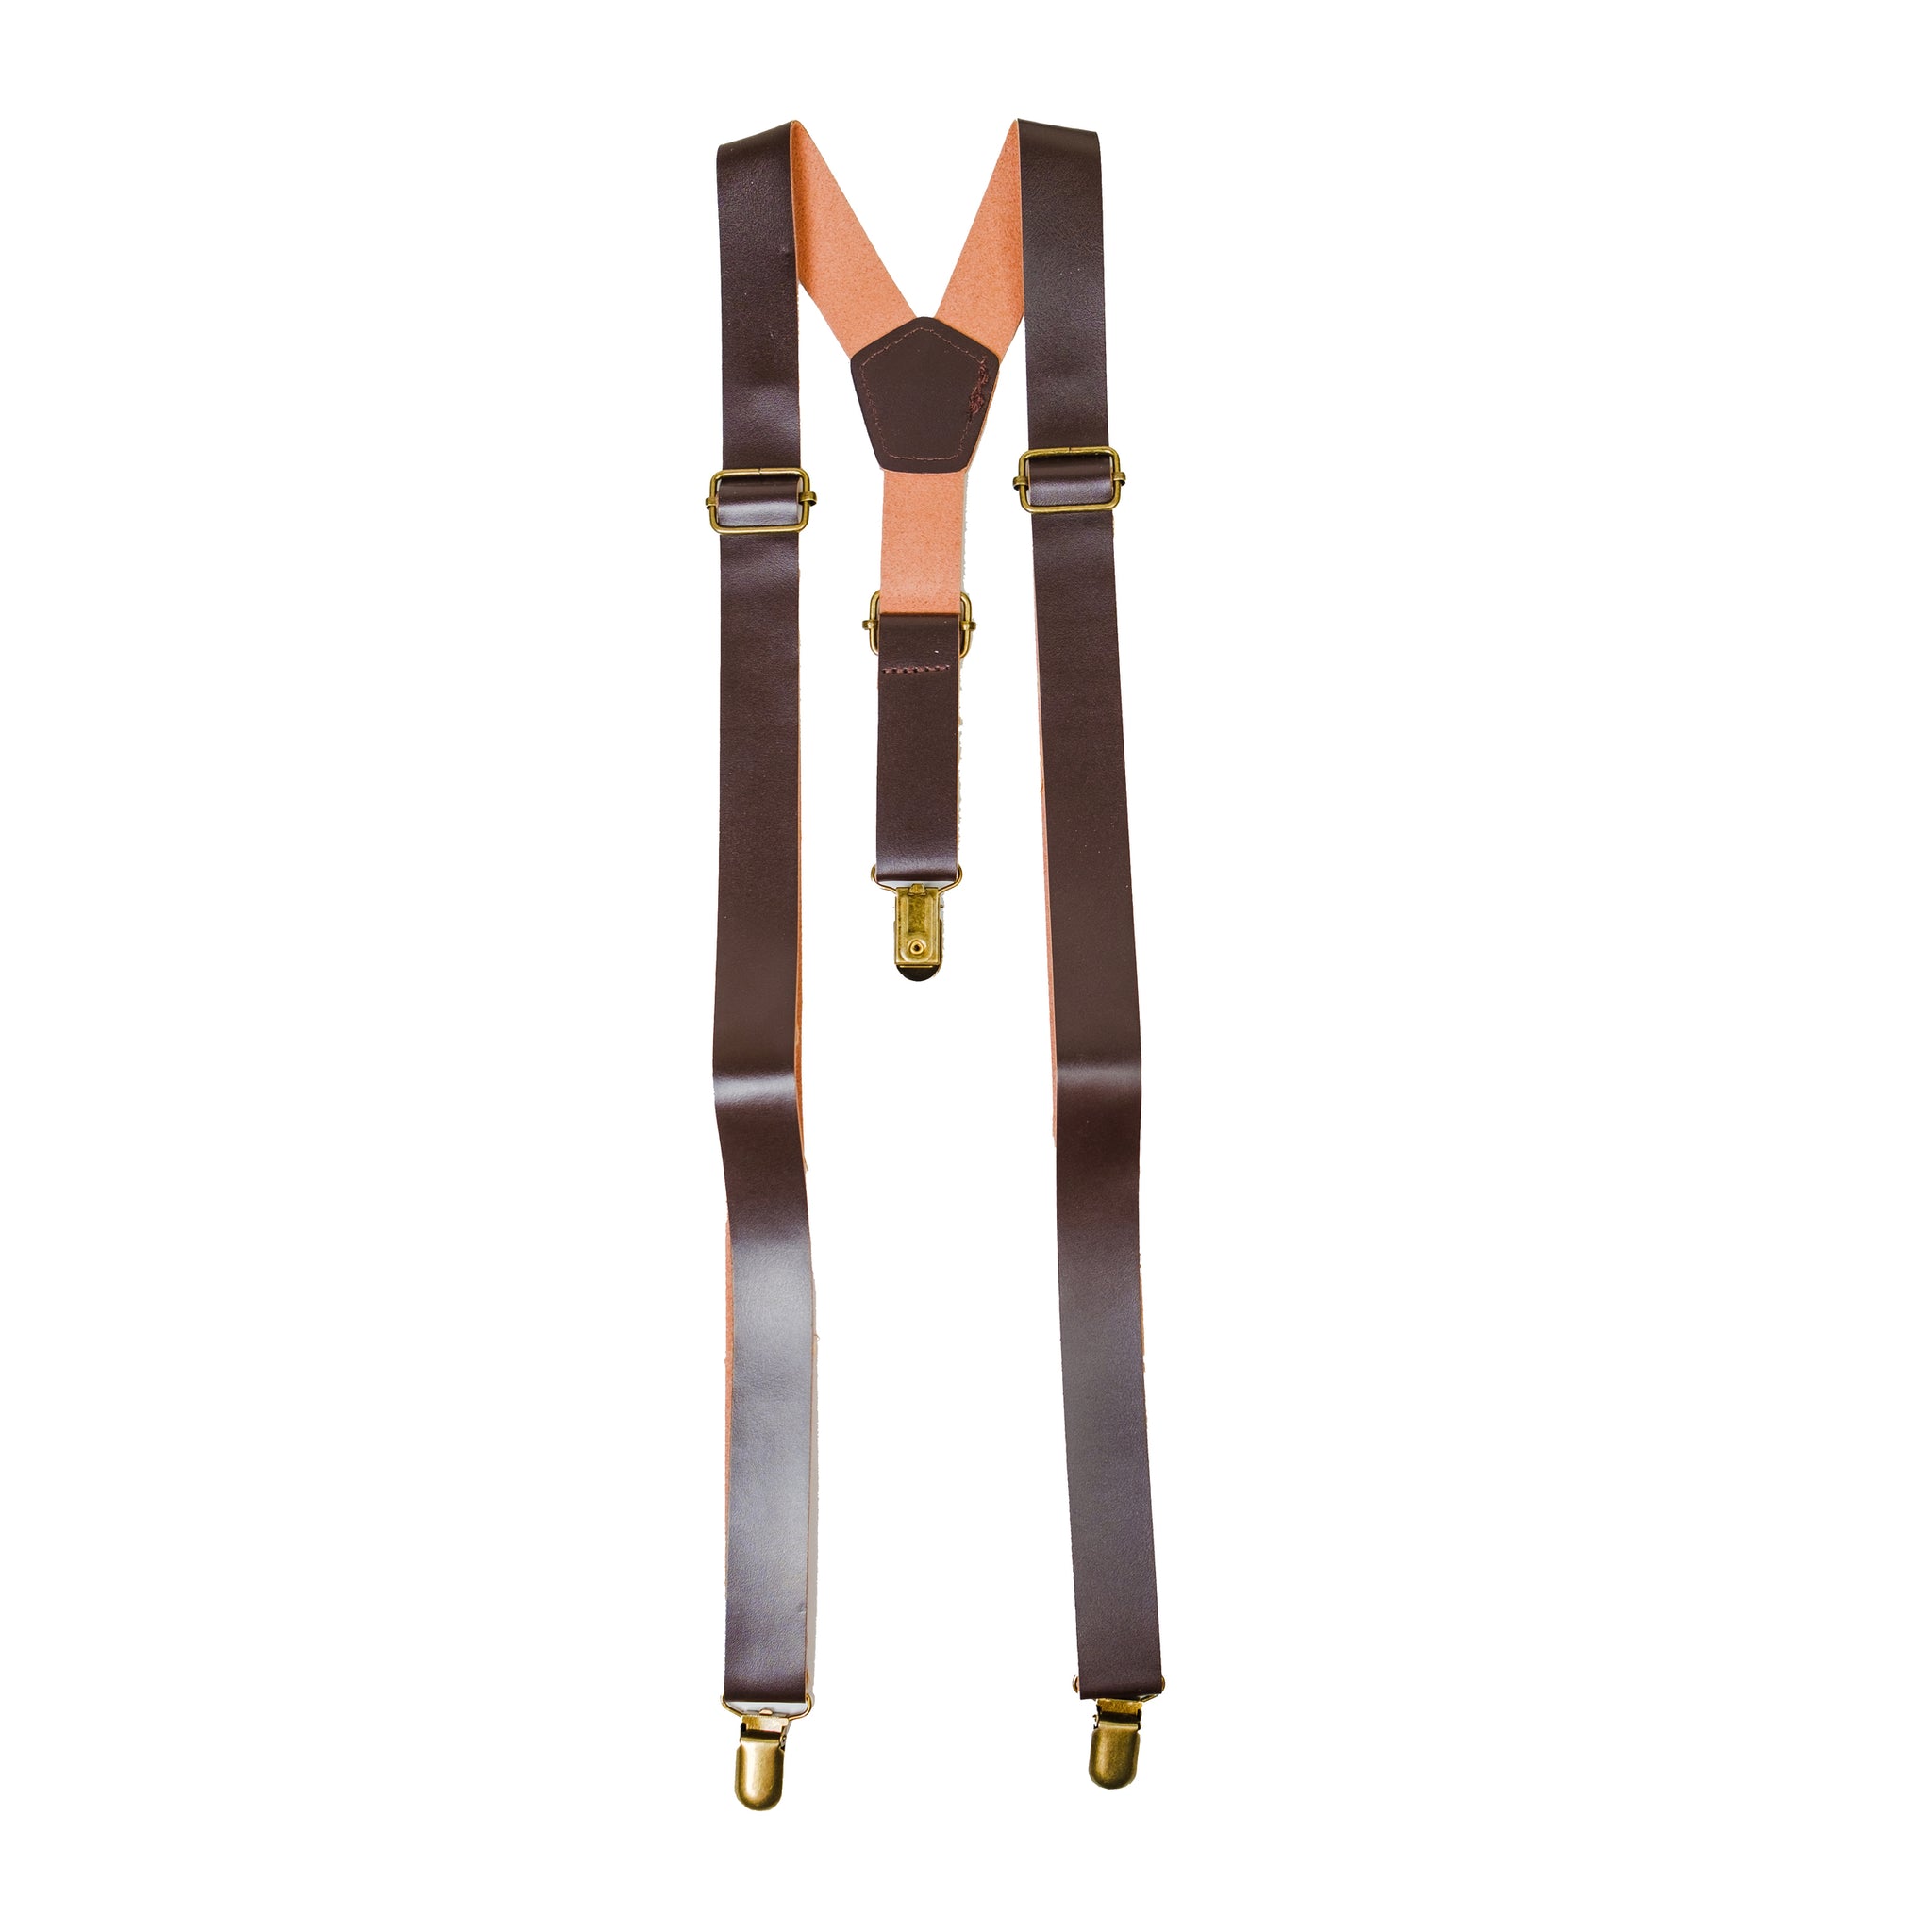 Chokore Y-shaped PU Leather Suspenders with Finger Clips (Chocolate Brown)